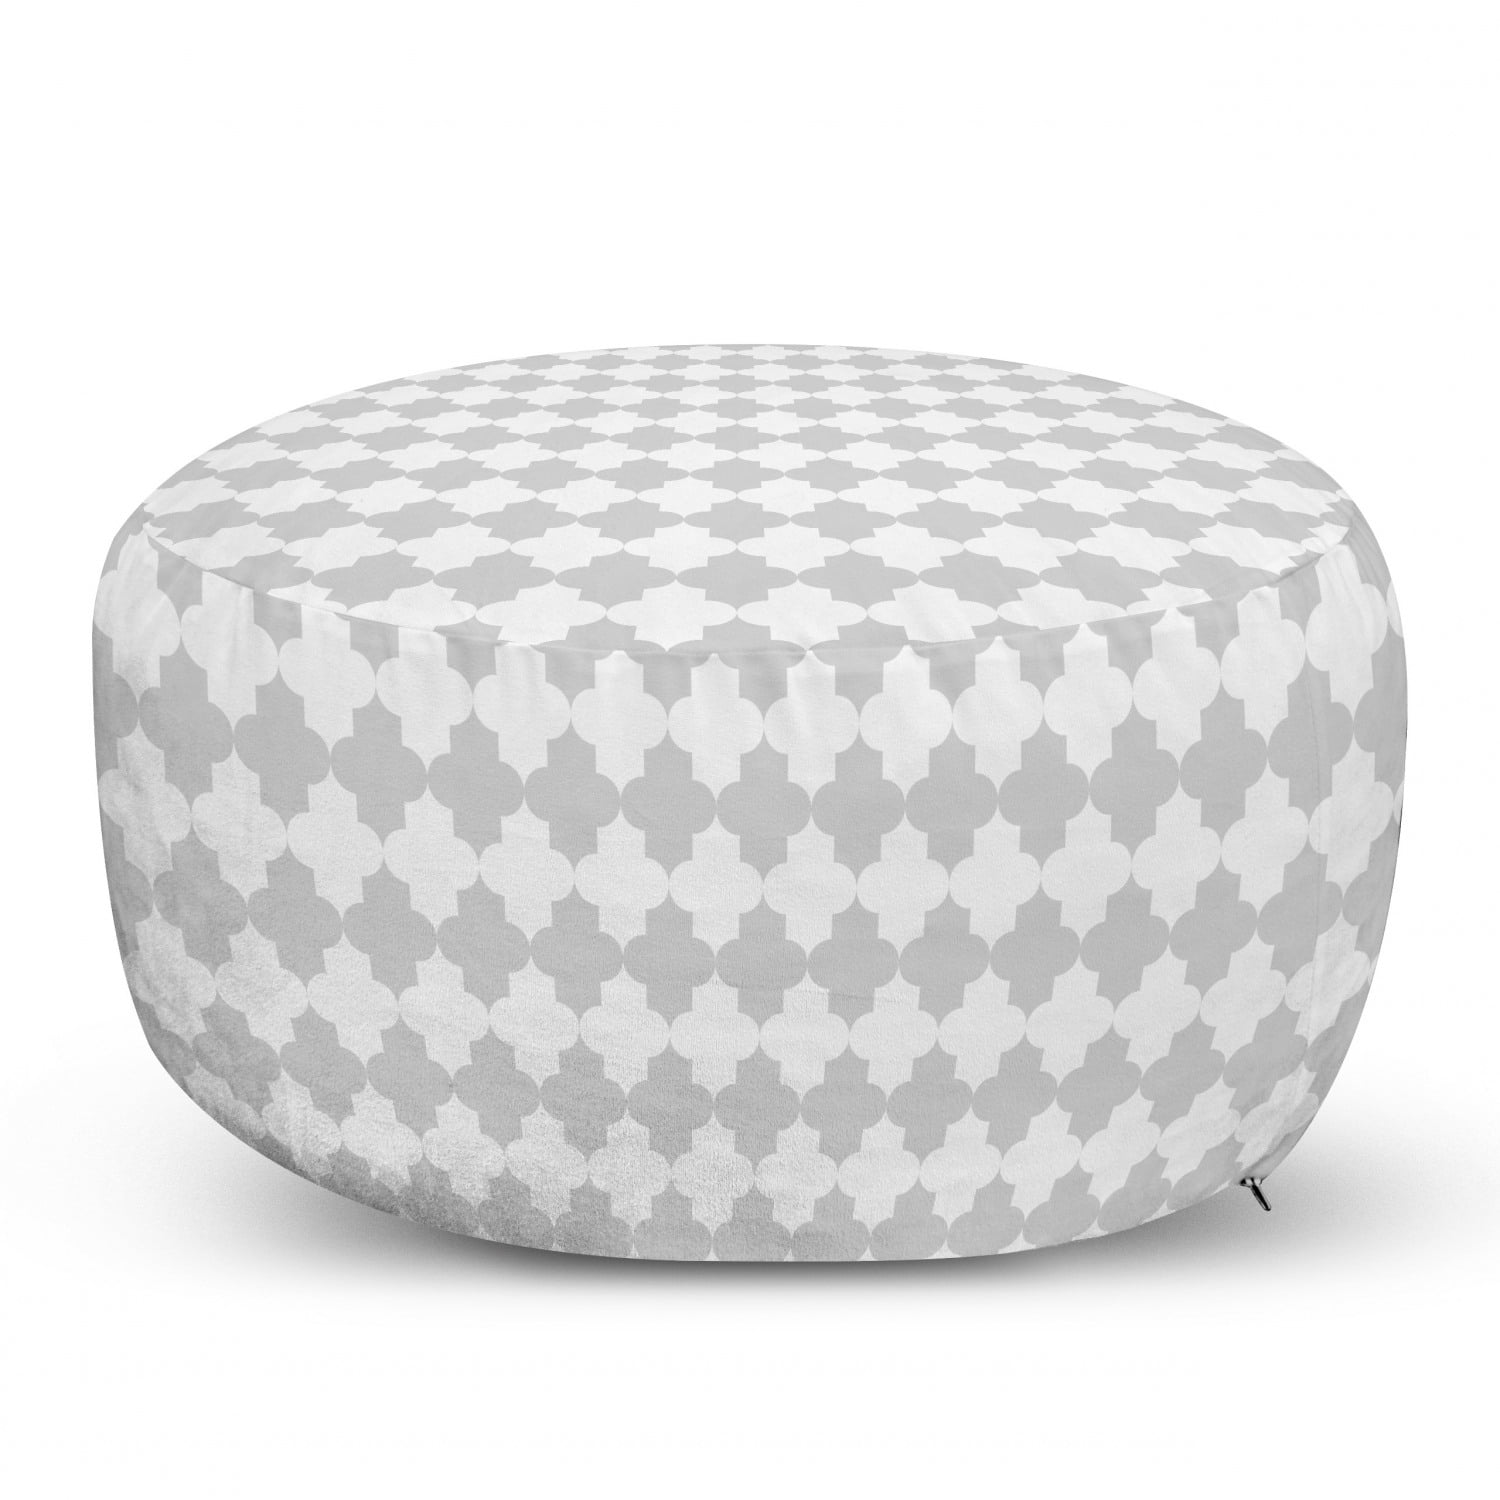 Snowflakes in Various Details and Designs Pastel Toned Repetition Under Desk Foot Stool for Living Room Office Ottoman with Cover Pale Pink and Dark Cocoa Ambesonne Winter Rectangle Pouf 25 